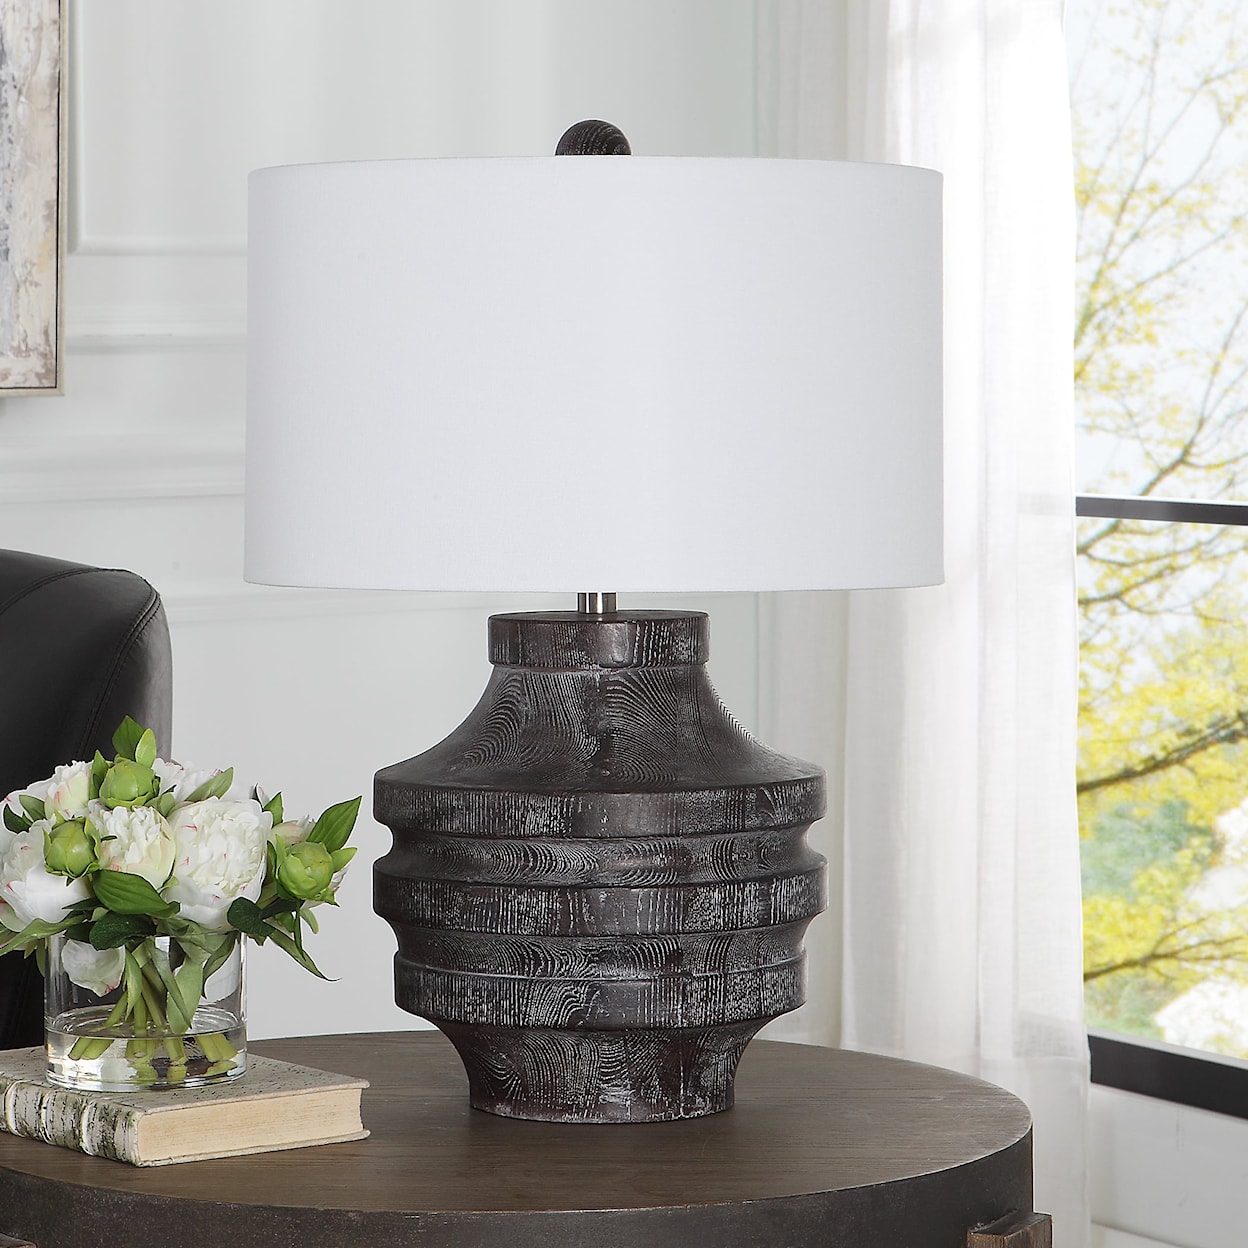 Uttermost Timber Timber Carved Wood Table Lamp